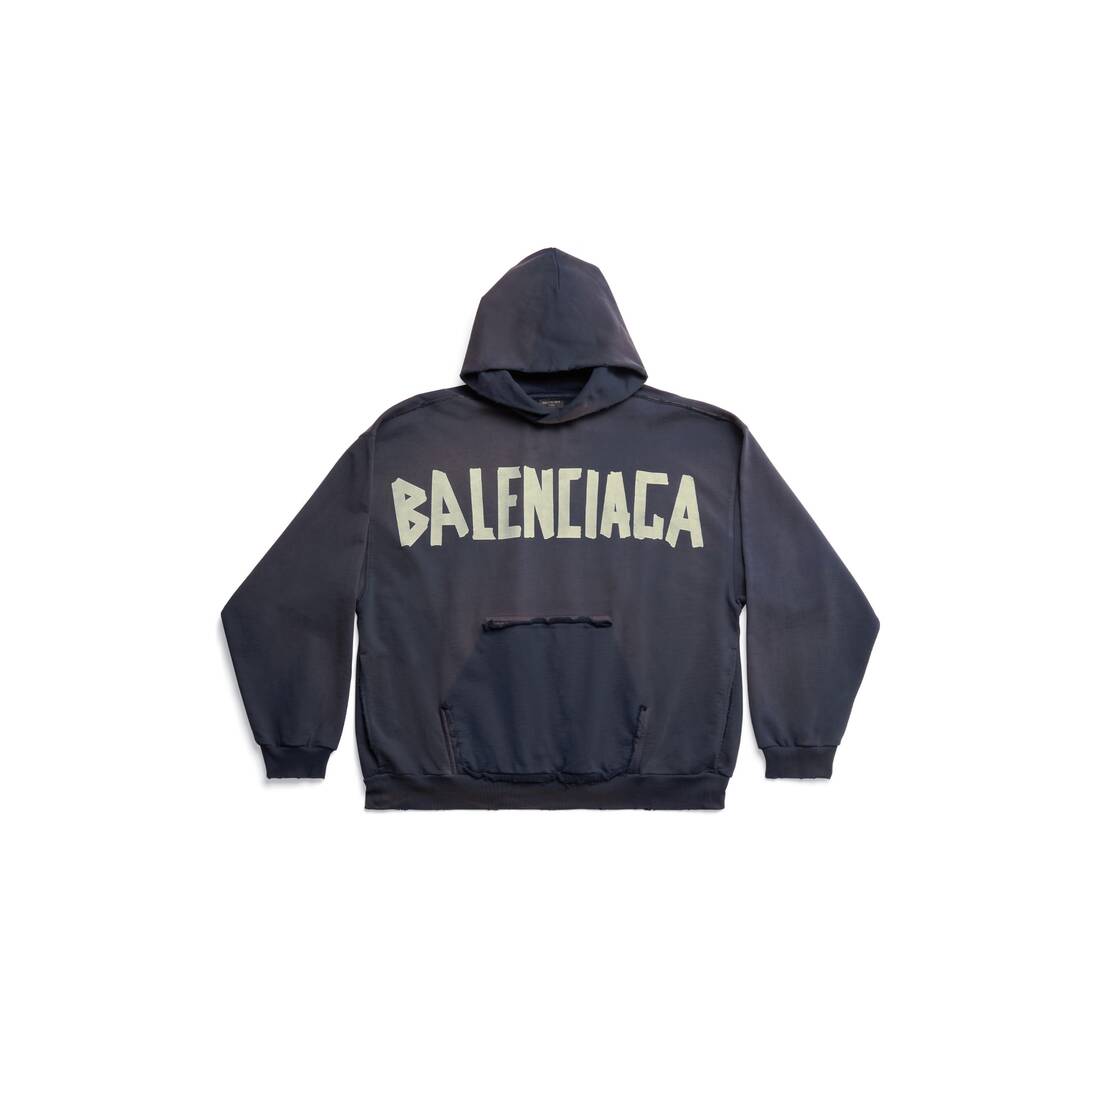 Type Ripped Pocket Hoodie Large Fit in Navy Blue Balenciaga NL